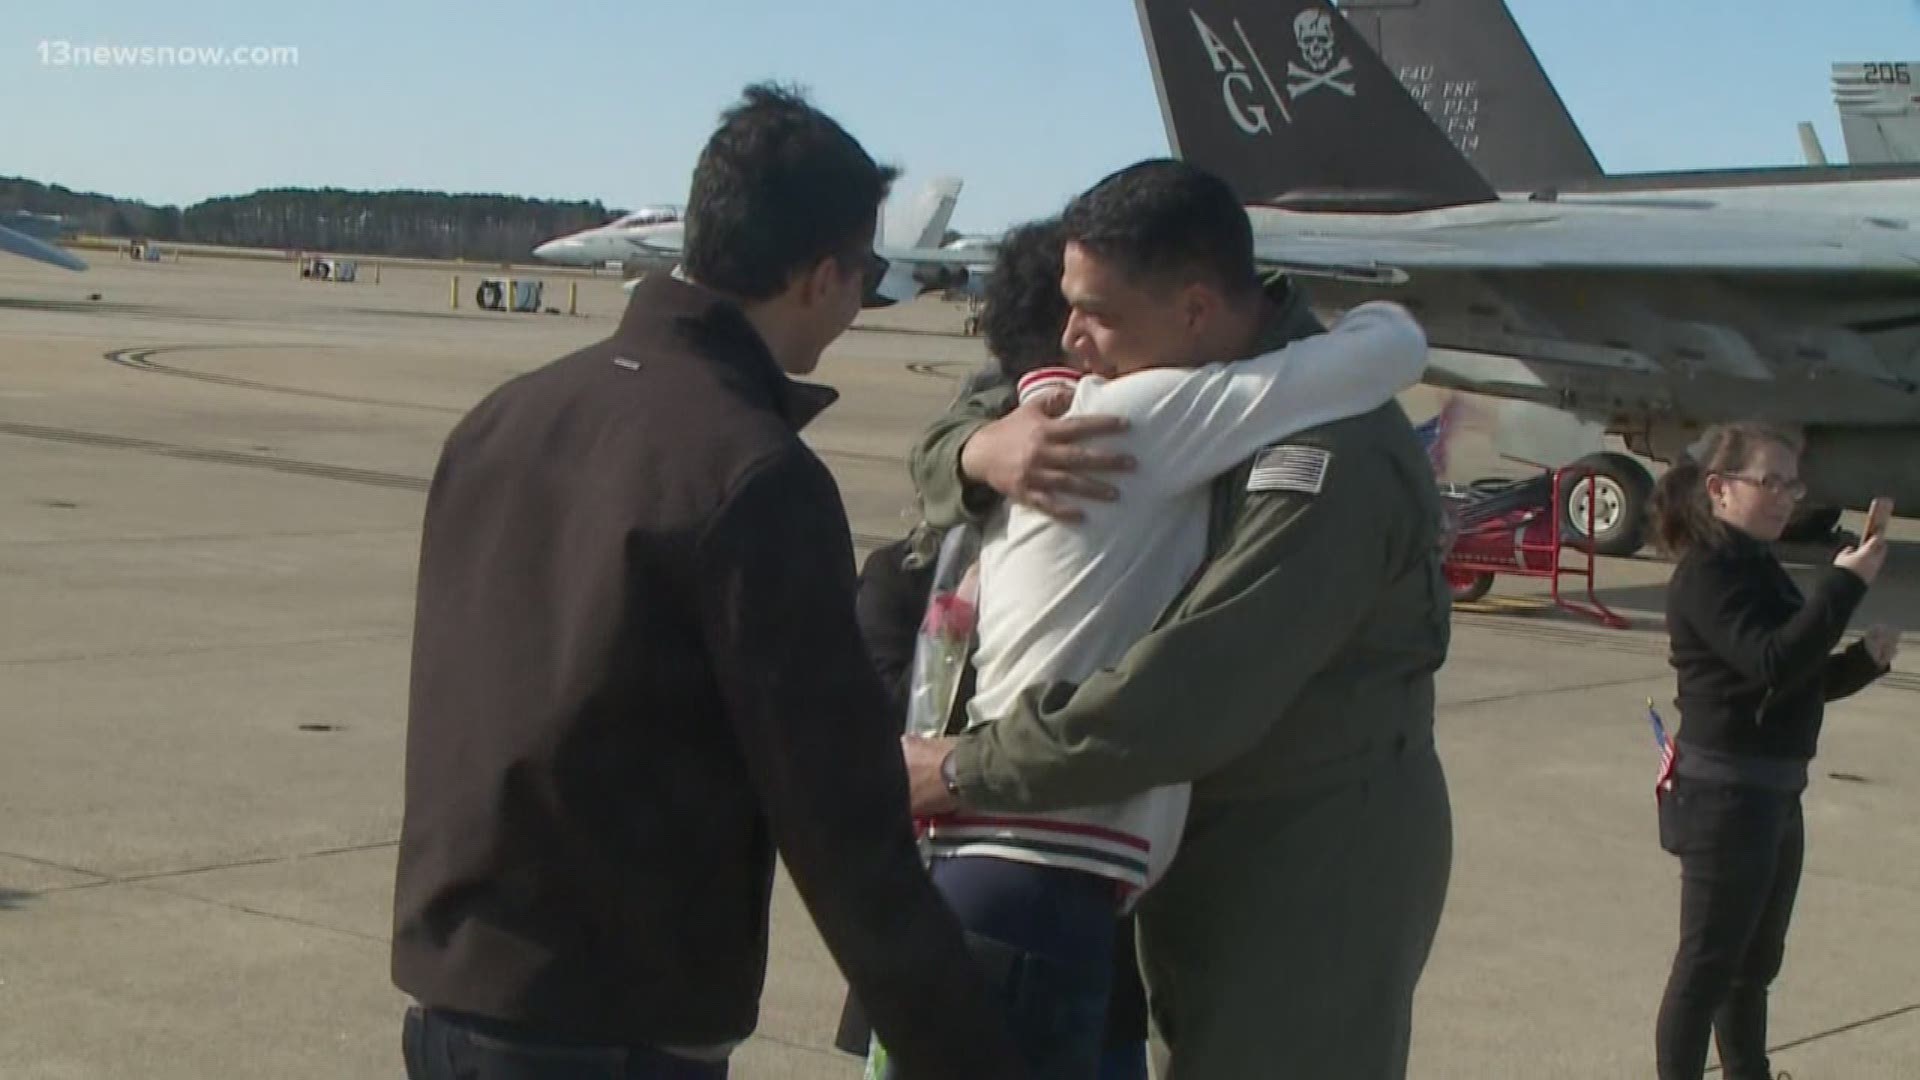 More than 100 Navy pilots and crew members returned to Naval Air Station Oceana and Norfolk Naval Station on Sunday after a nearly 10-month deployment.